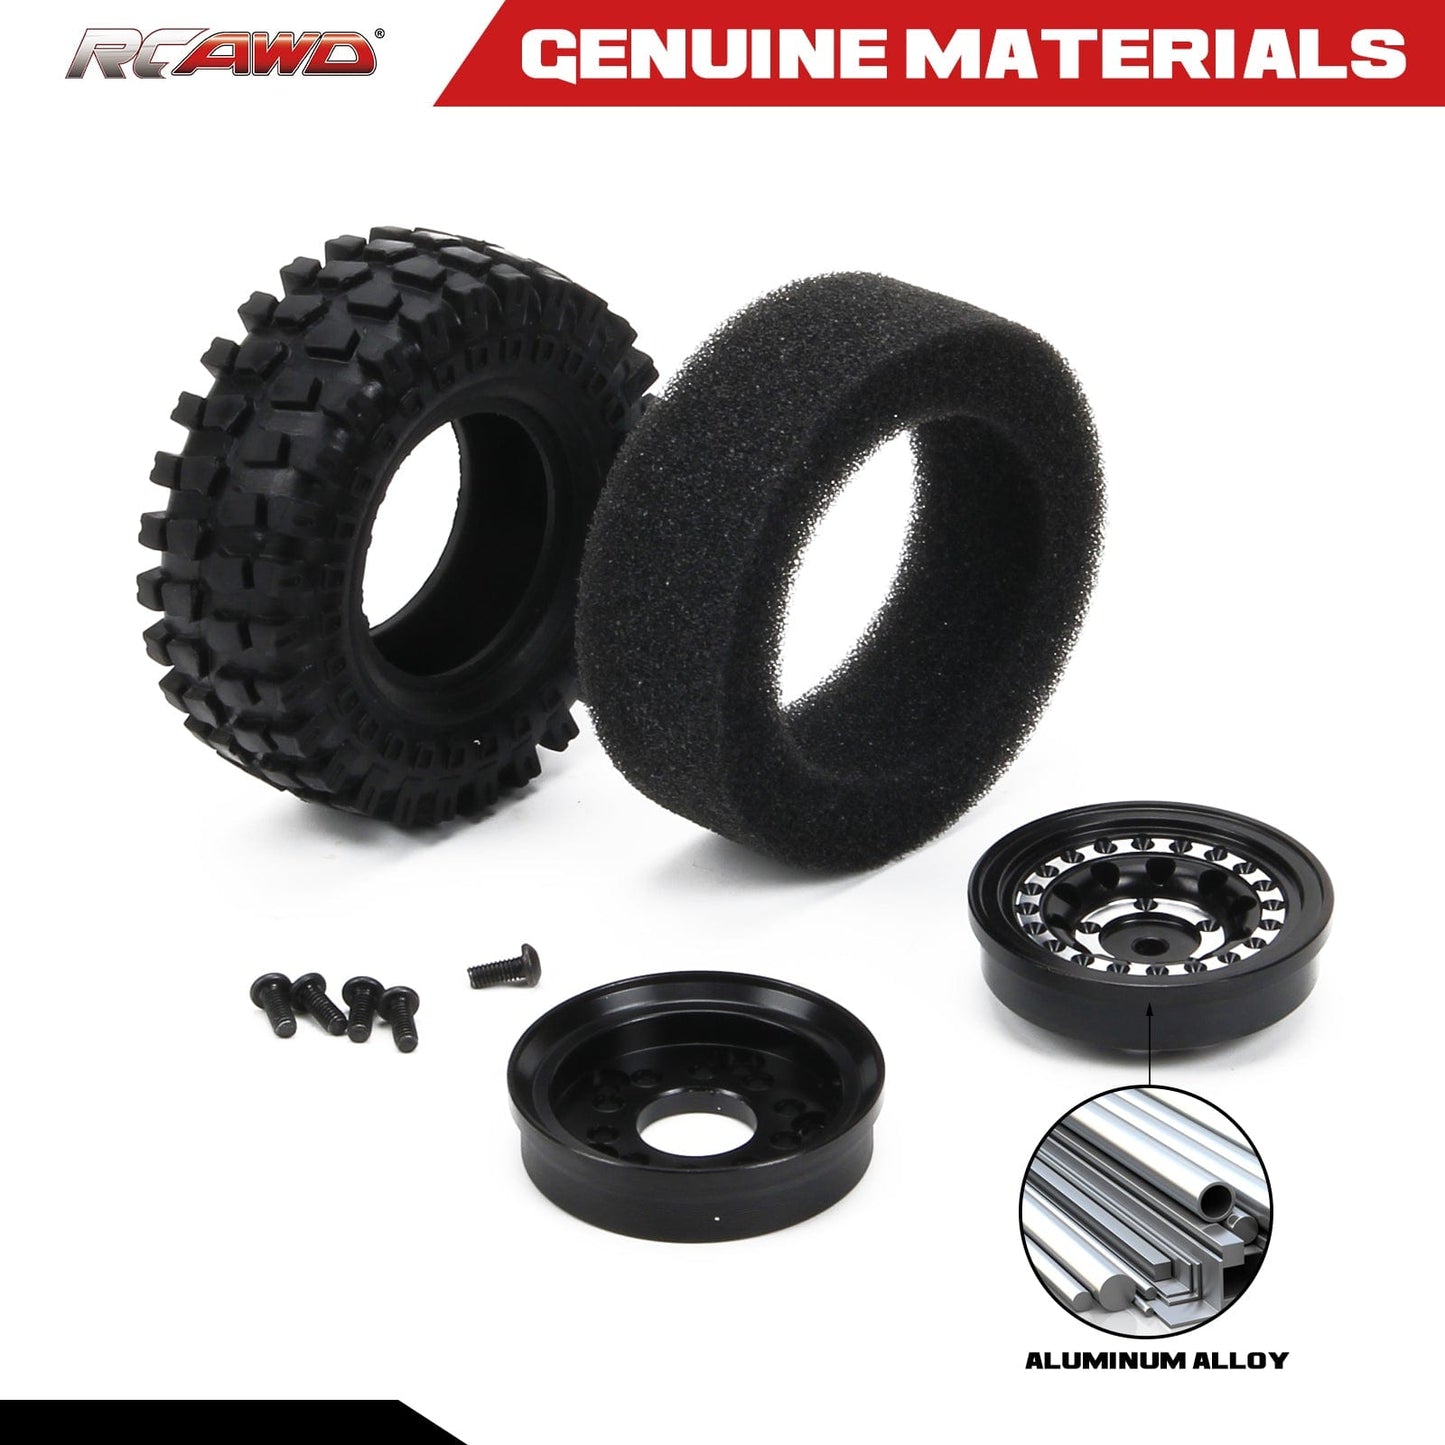 RCAWD FMS FCX24 RCAWD 60*20mm Full Alloy 1.3" Beadlock Glue-free Wheel Tire Set for FMS FCX24 and SCX24 Crawlers